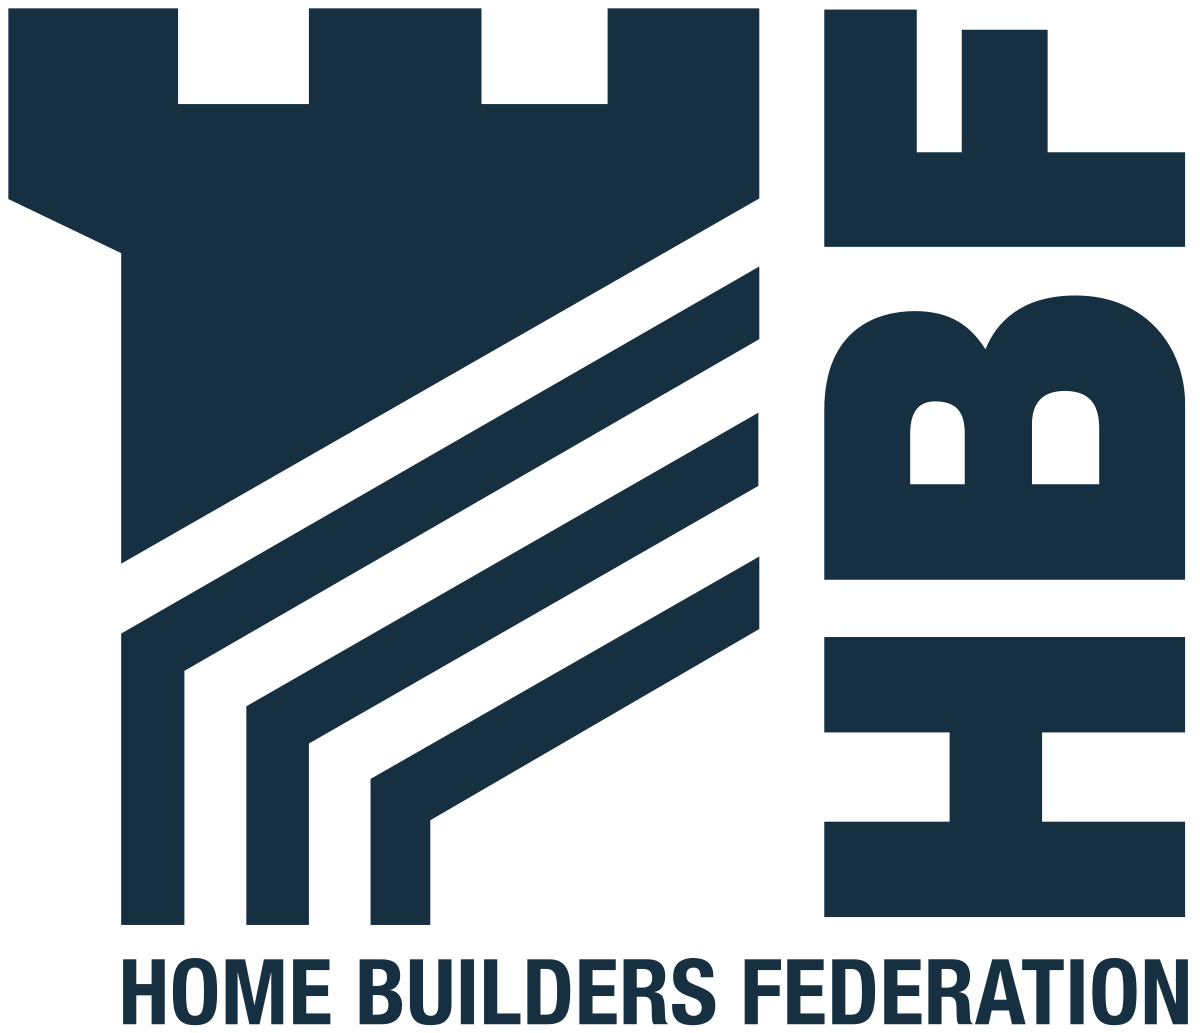 Home Builders Federation